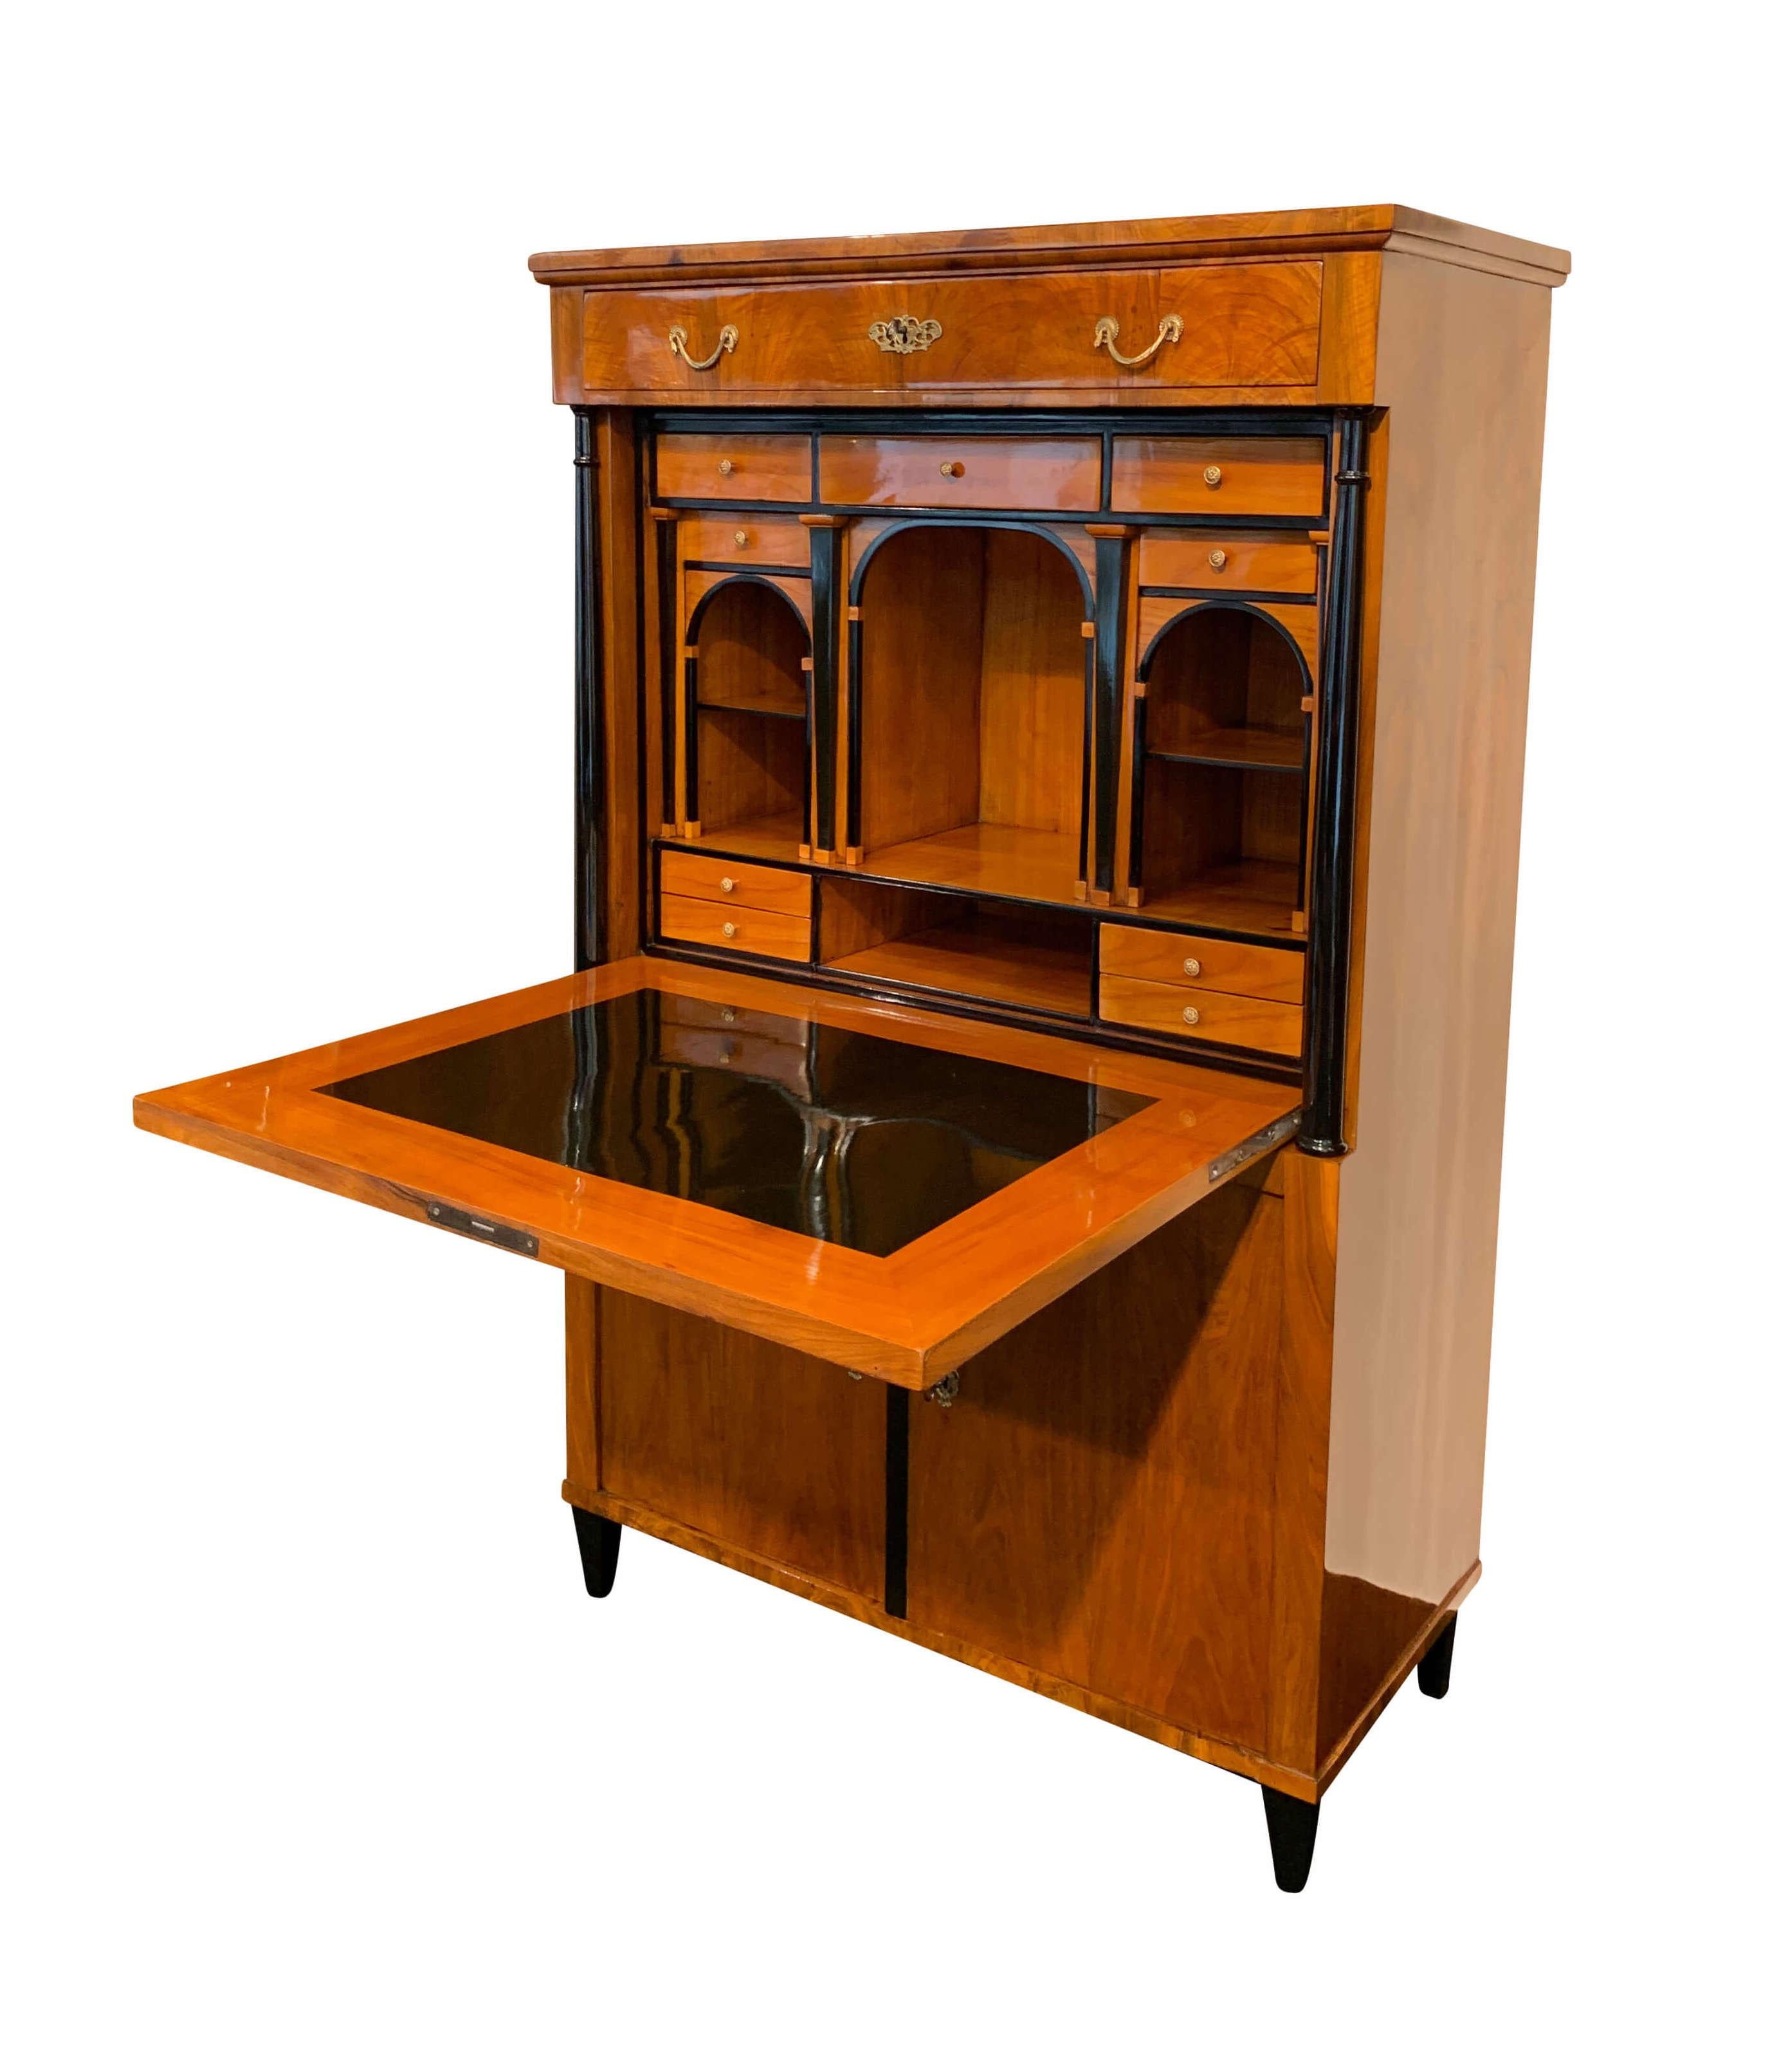 Beautiful original, neoclassical early Biedermeier Secretaire from Austria, Vienna around 1820.

Outside in book-matched walnut veneer and solid wood with ebonized conical full-columns. The fold-down plate has been done in cherry solid wood with